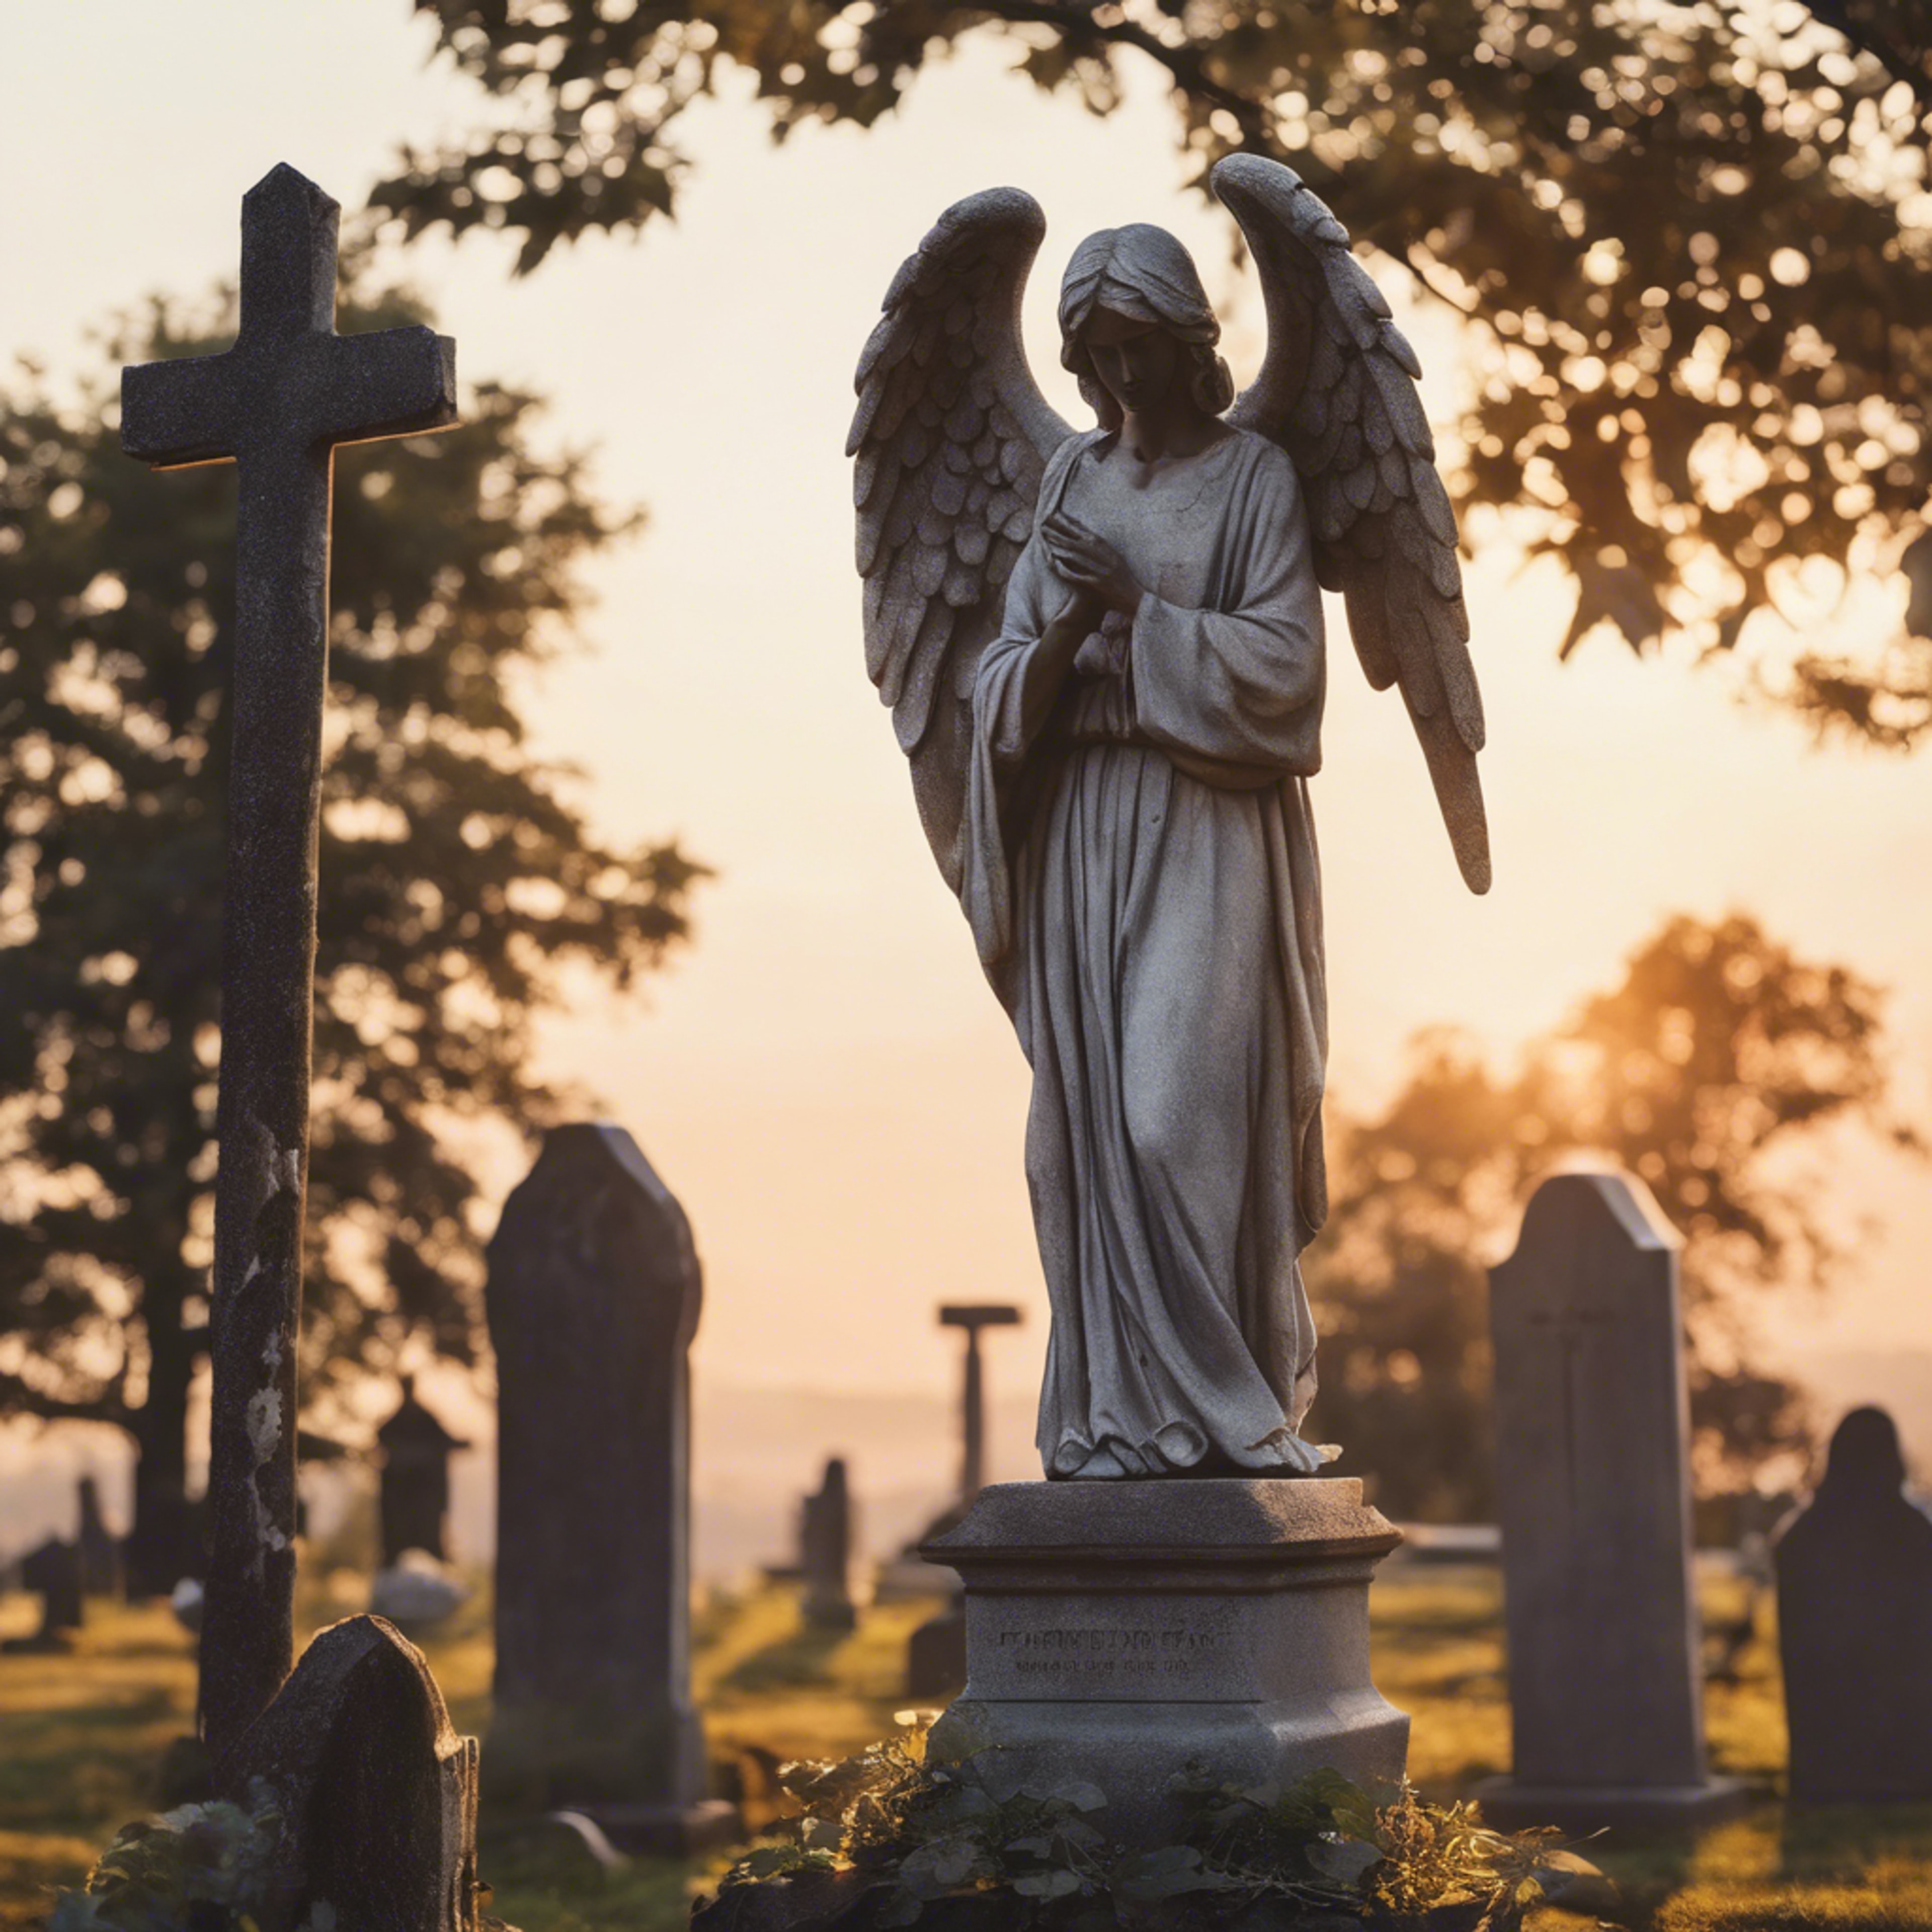 A peaceful graveyard scene with a stone angel statue guarding over the resting place under a serene sunset. Tapeta[5f1d382335d645bc8b2f]